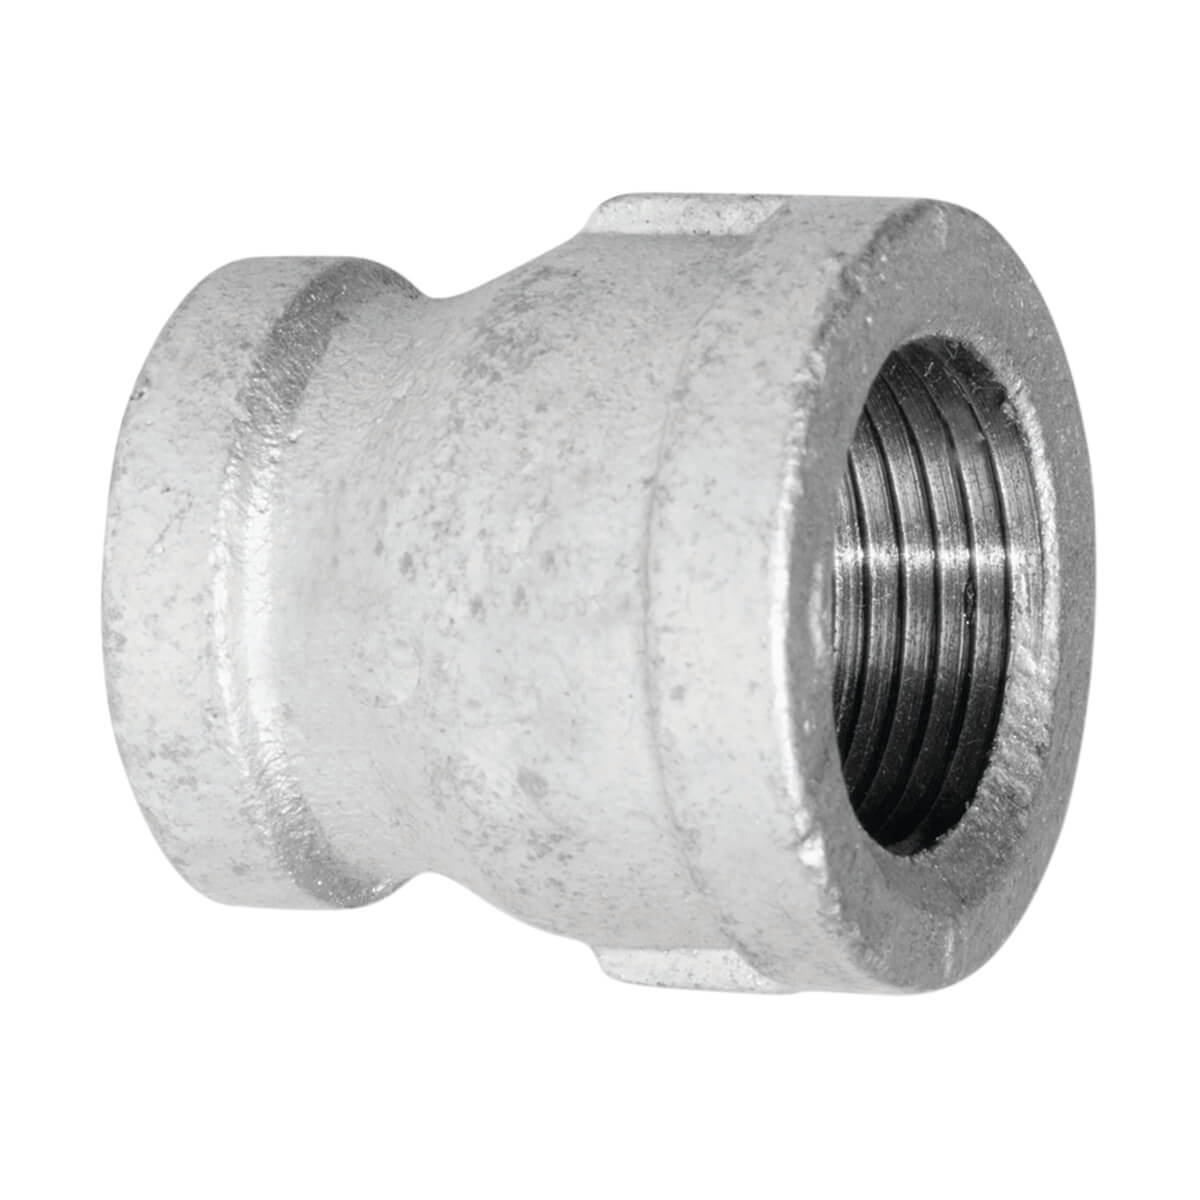 Fitting Galvanized Iron Coupling - 1-½-in x 1-in